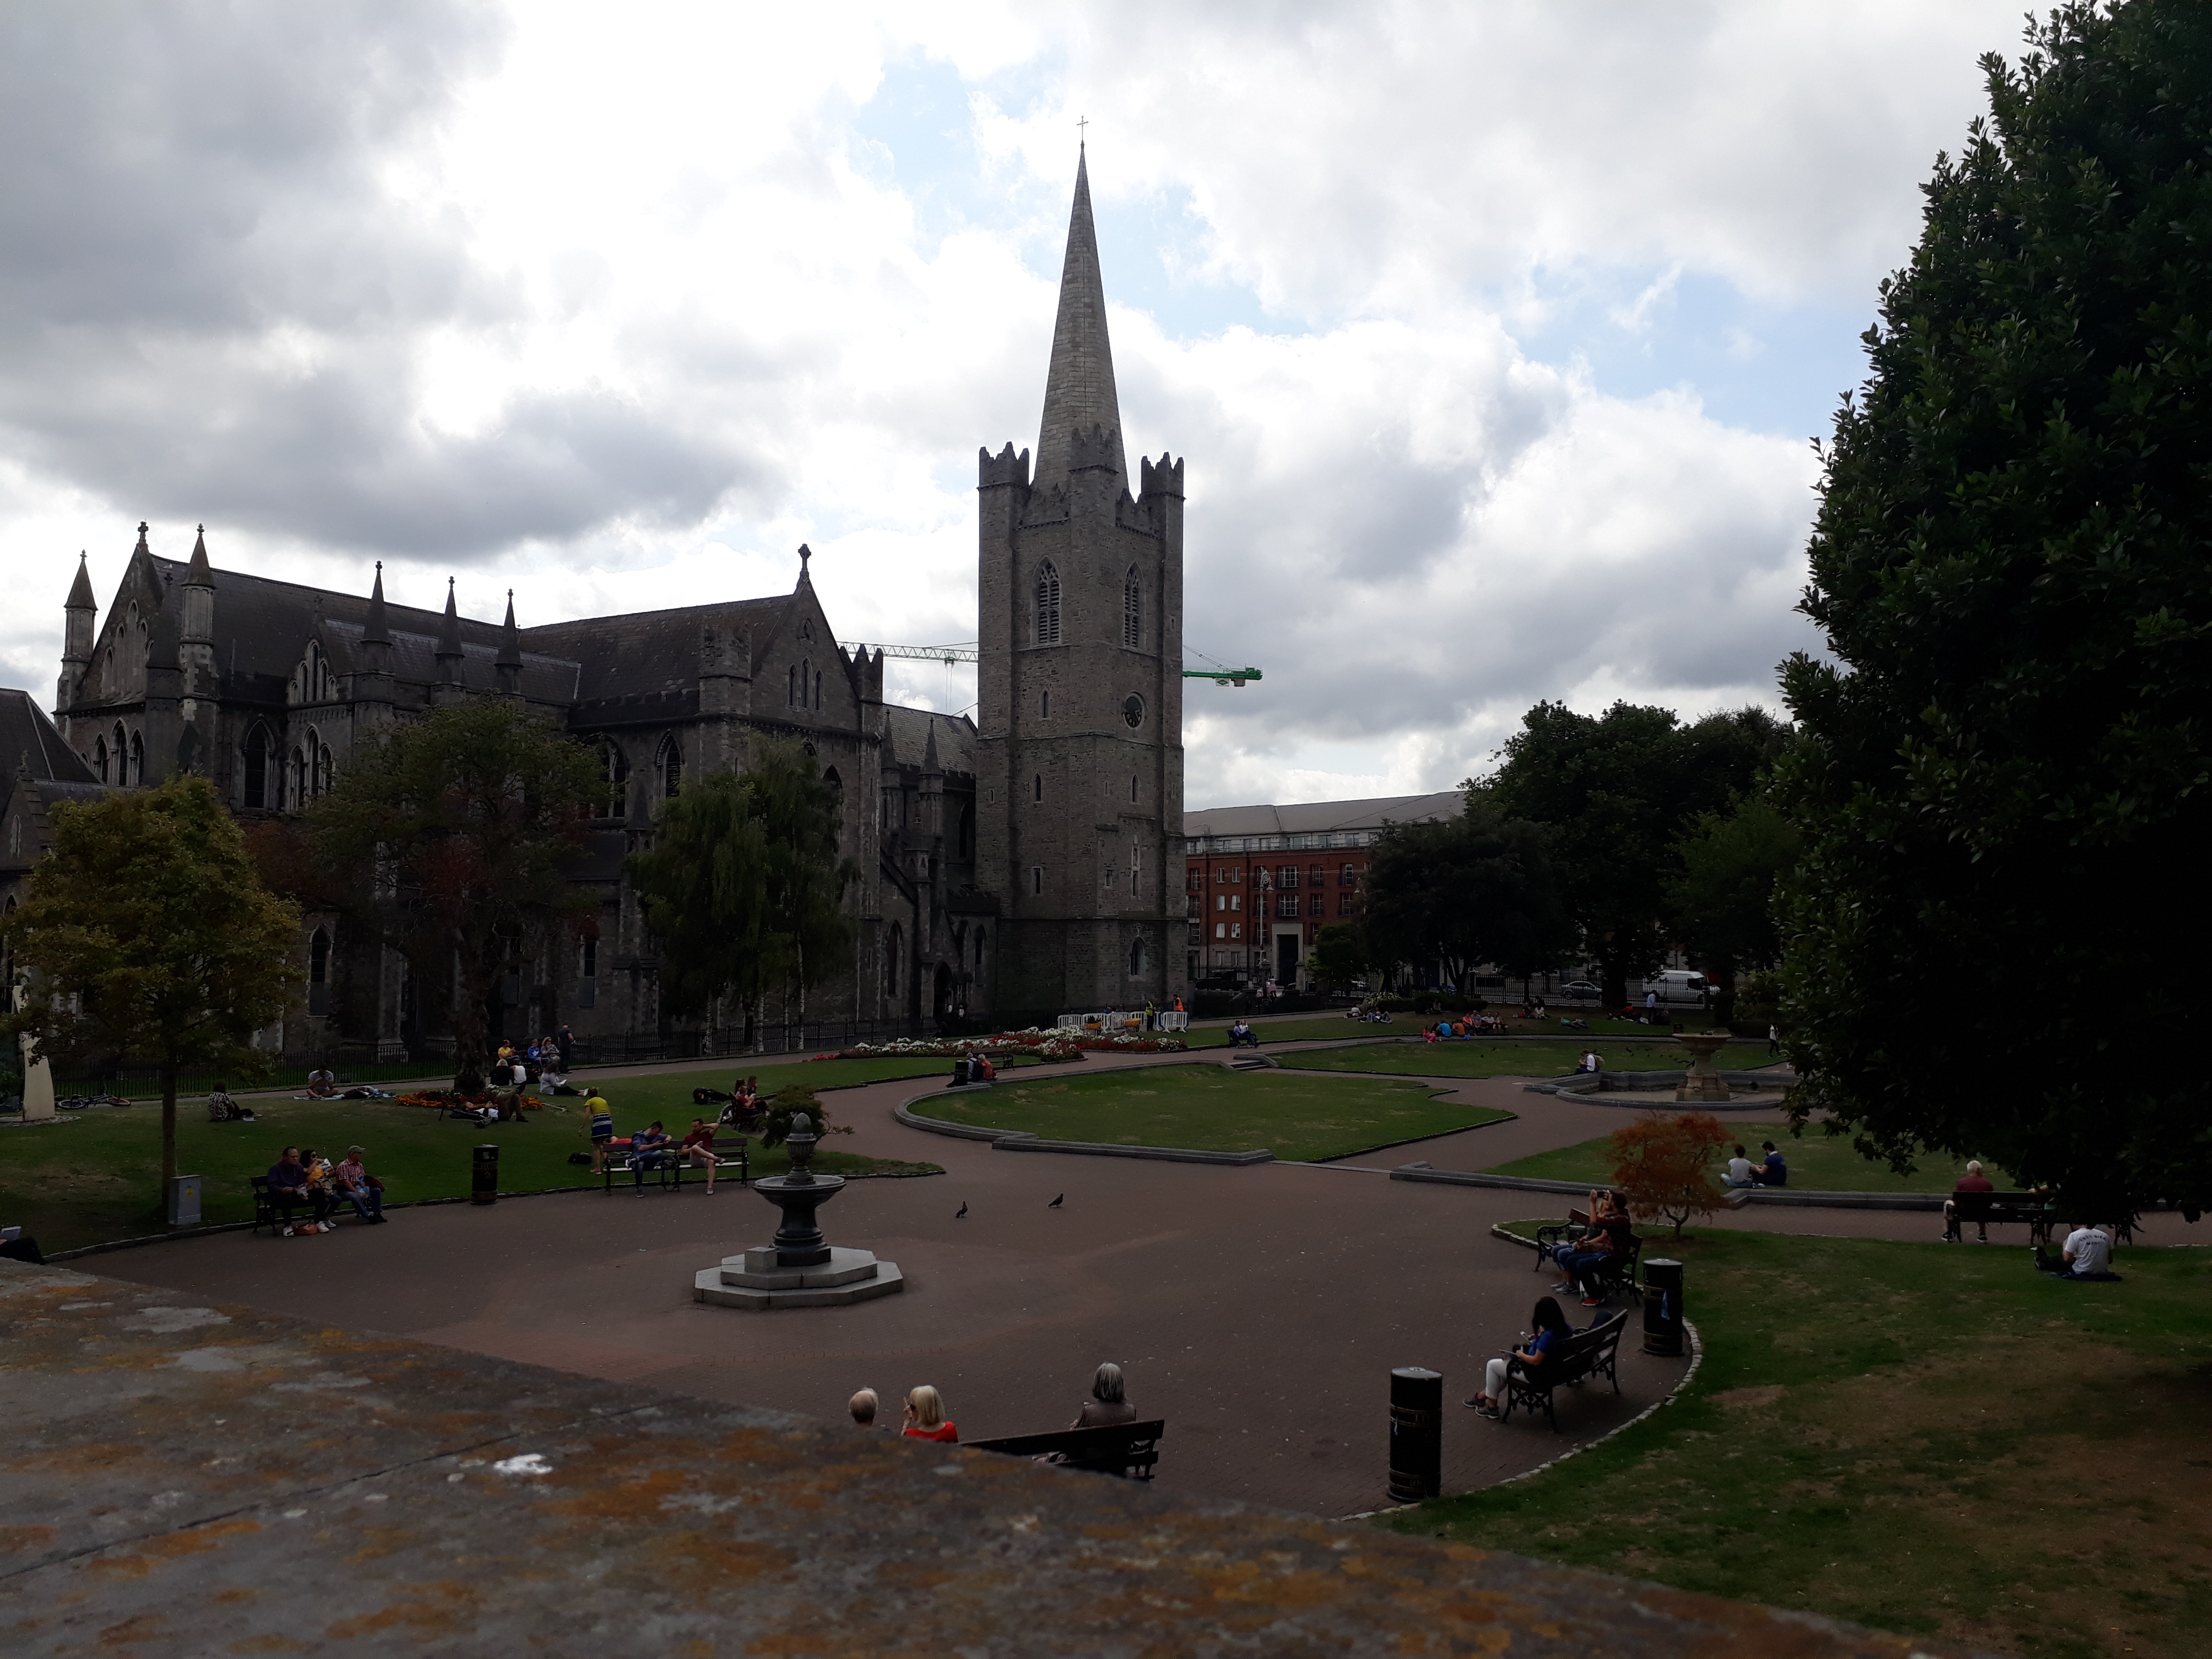 St Patrick's cathedral